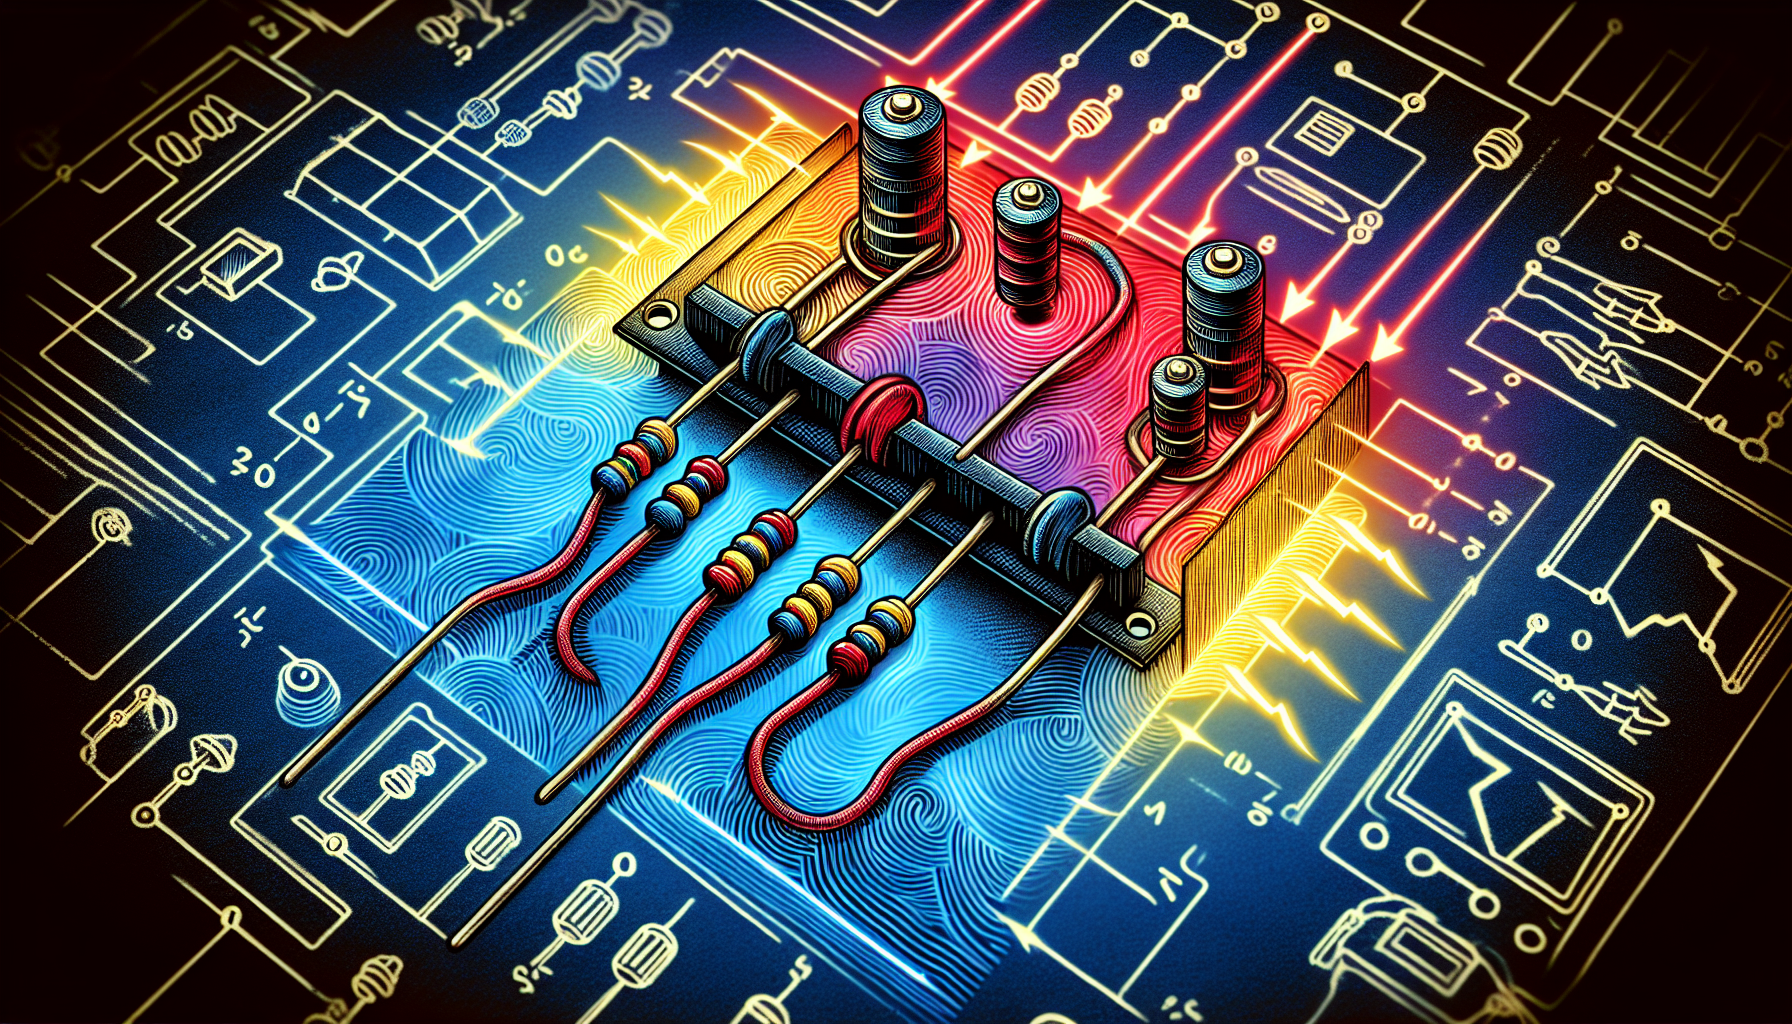 Voltage divider circuit with two resistors